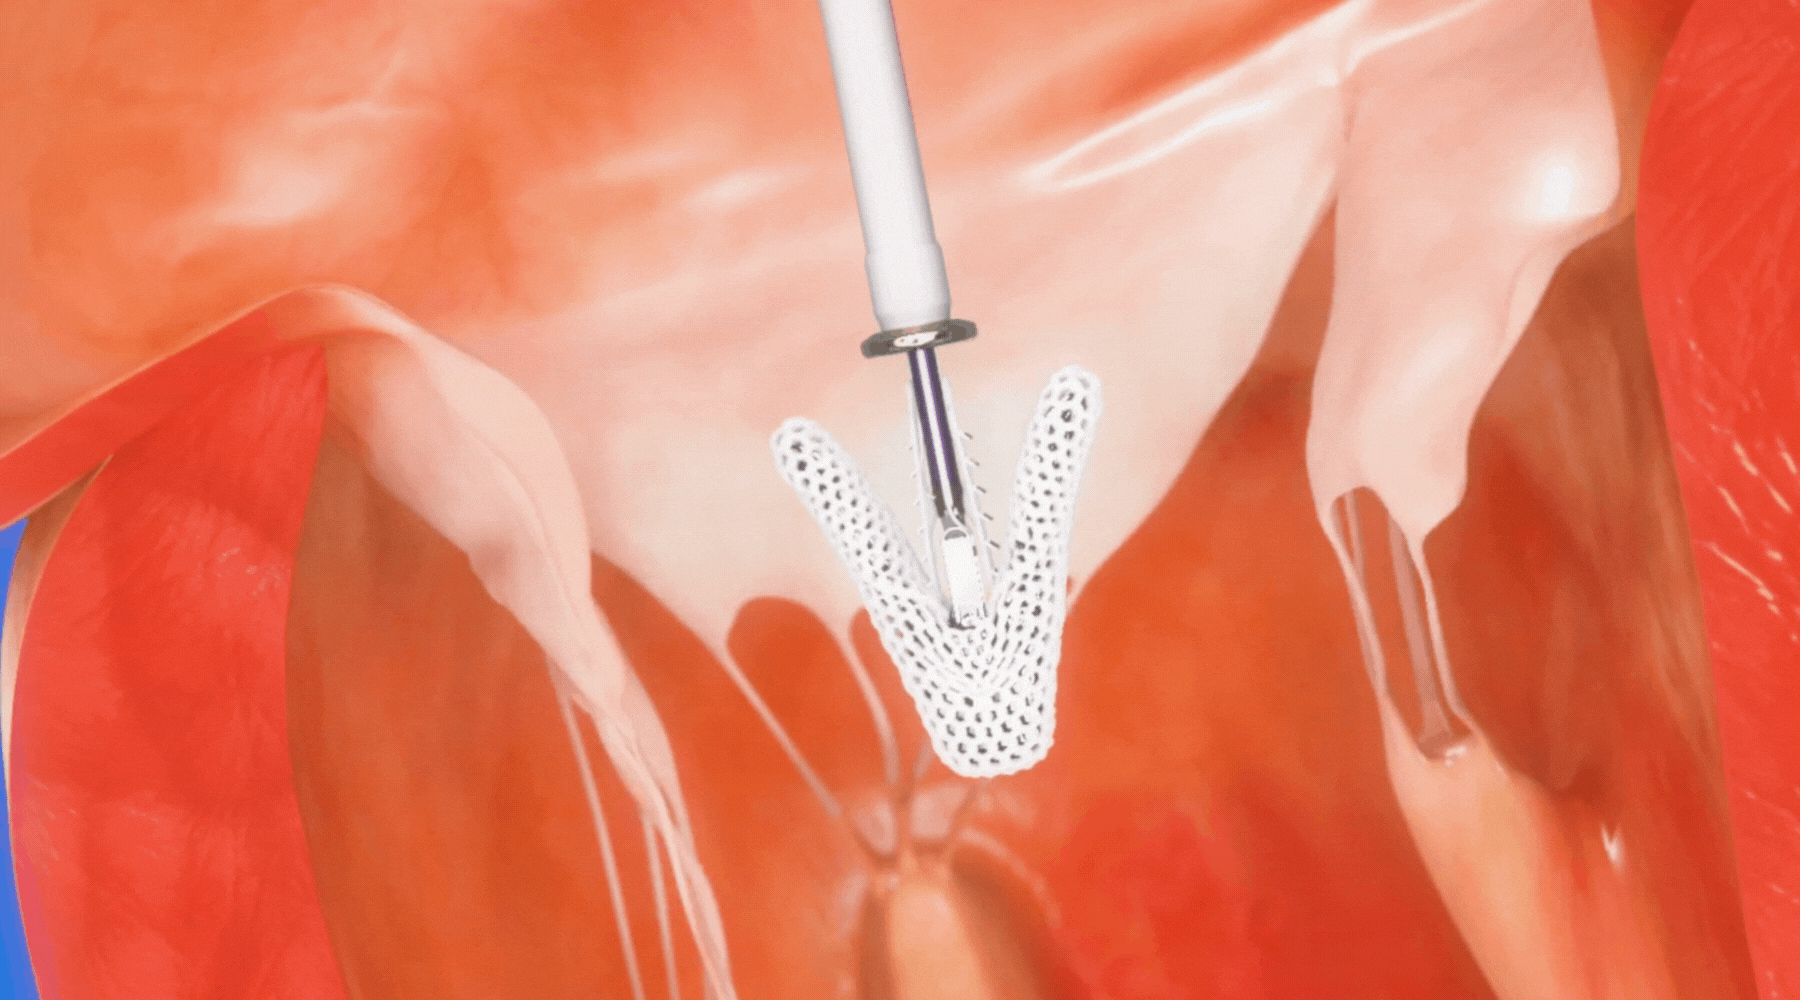 GIF showing Abbott's TriClip transcatheter edge-to-edge repair (TEER) device being deployed to repair a leaky tricuspid valve